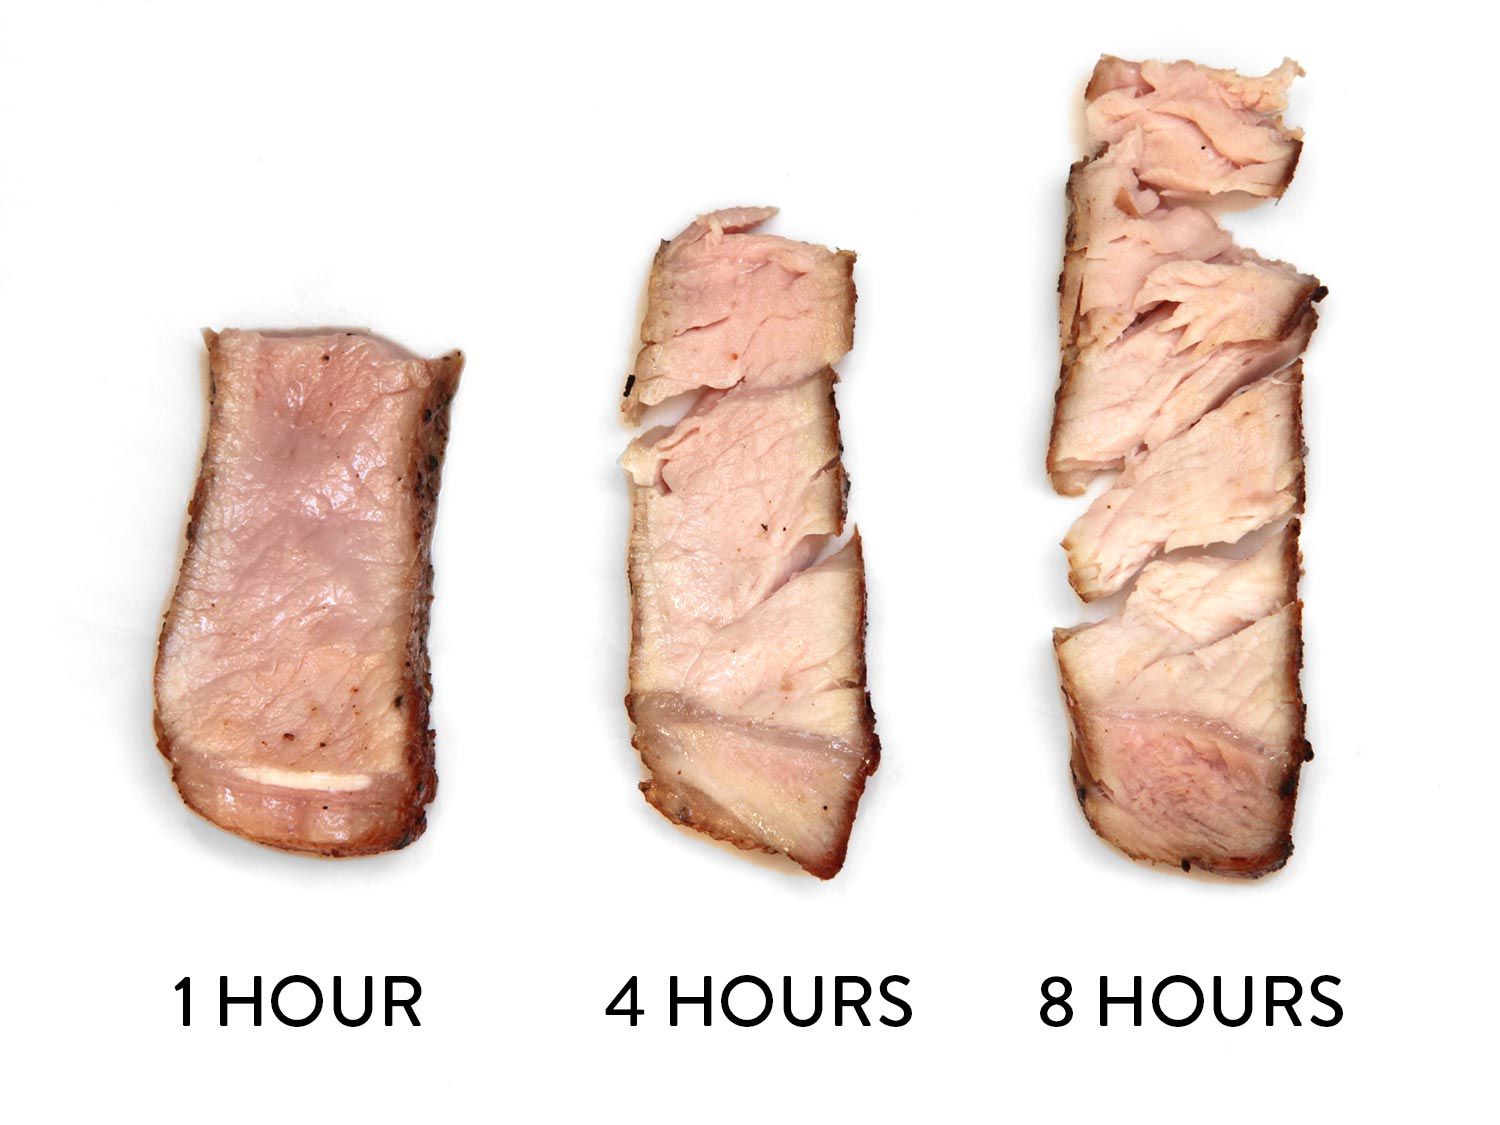 Photo illustration showing sous vide pork chops cooked to the same temperature but held for 1 hour, 4 horus, and 8 hours.